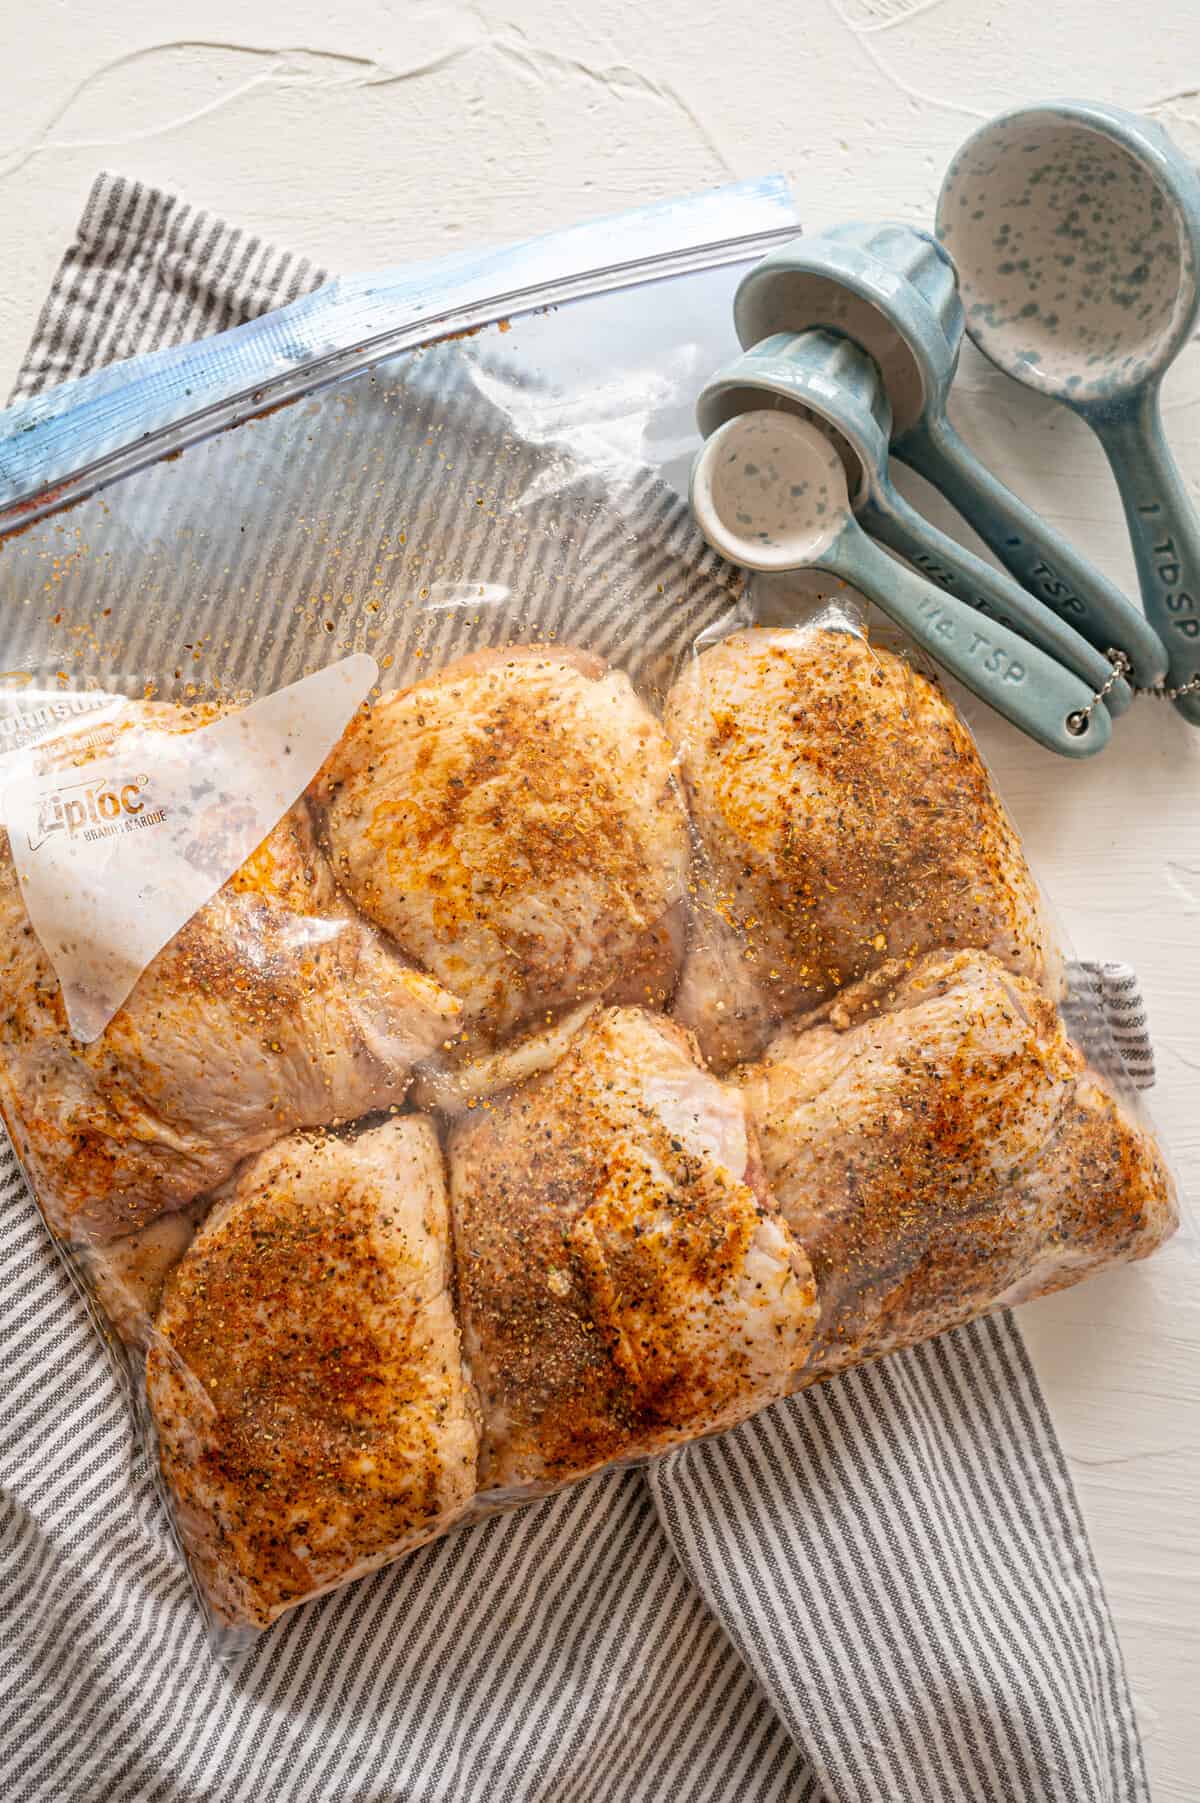 Italian chicken thighs packaged as a freezer meal with uncooked chicken thighs covered in seasoning in a freezer bag.